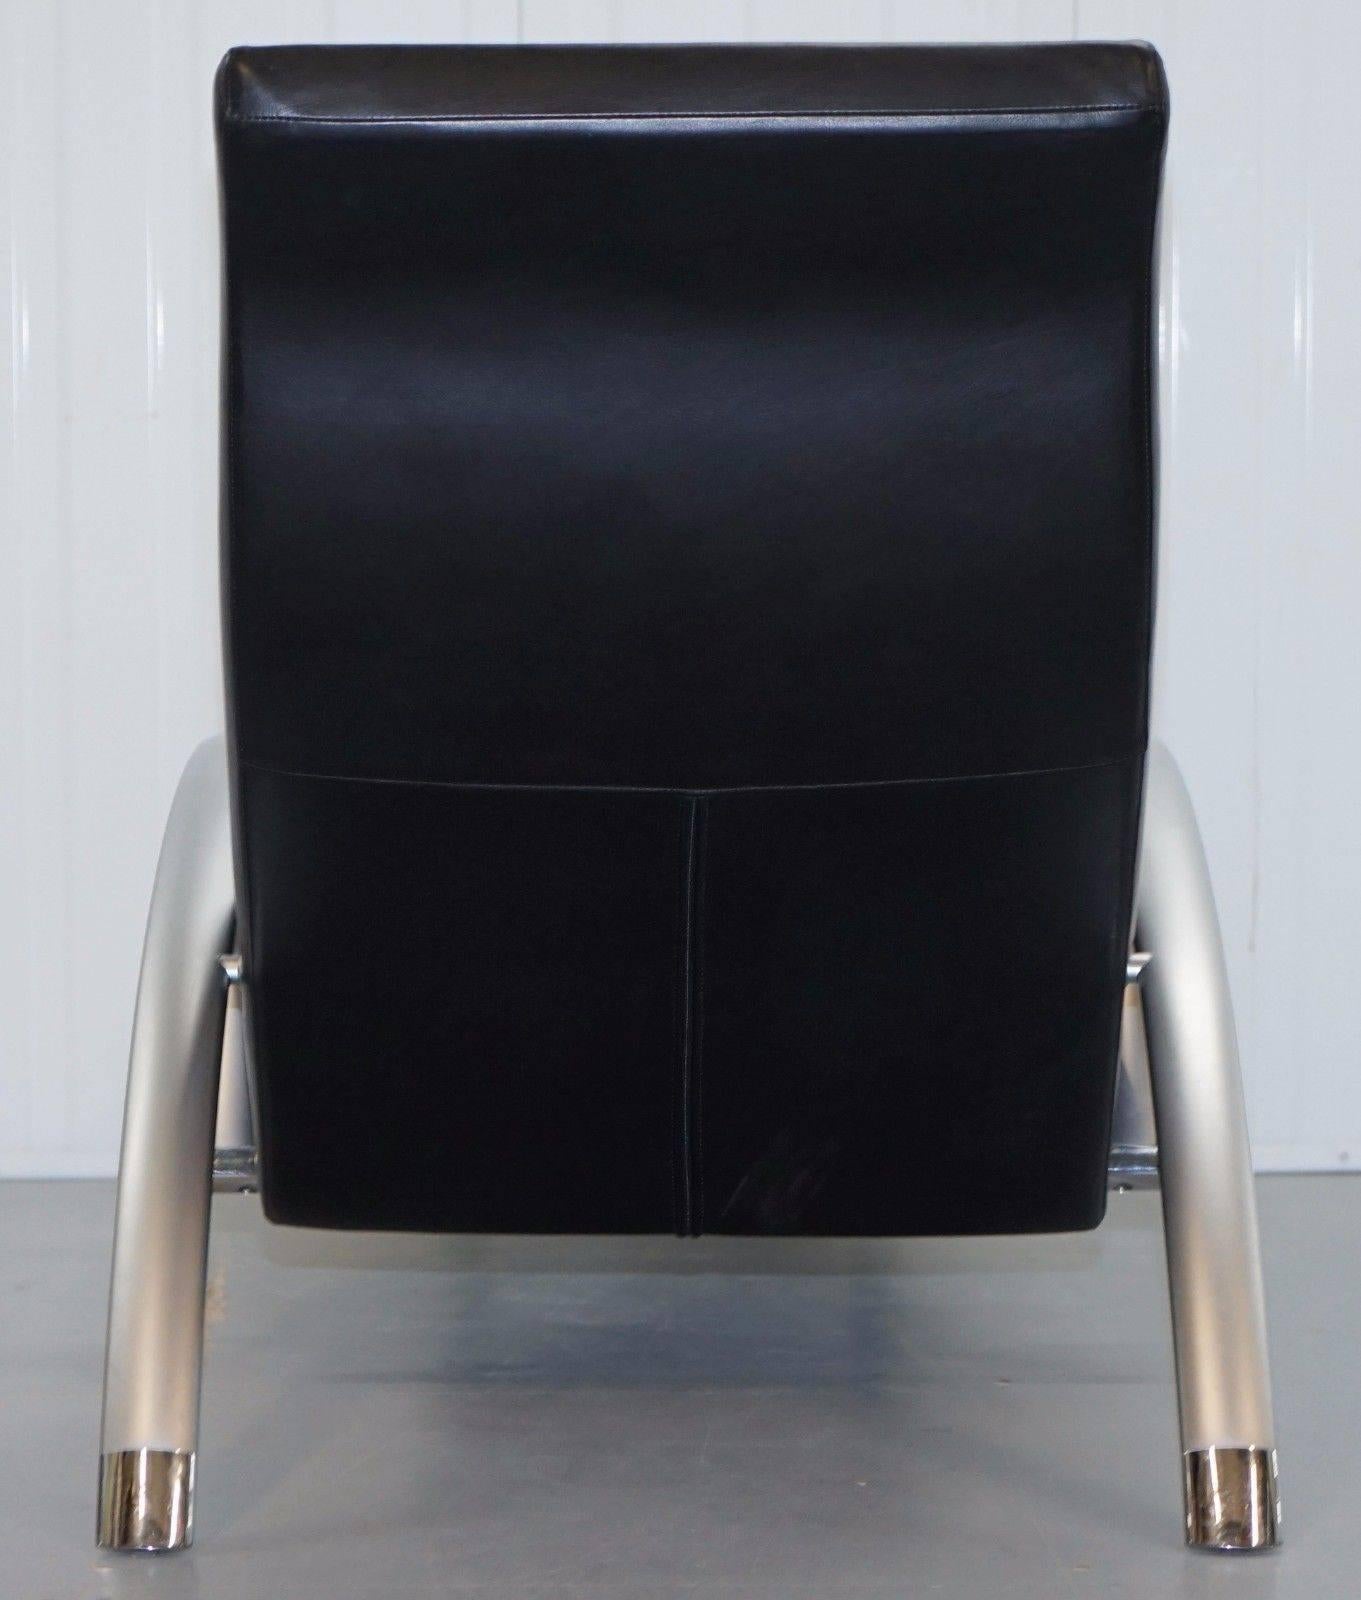 Stunning Rolf Benz Creation 2600 Black Leather Contemporary Lounge Chair Recline 1